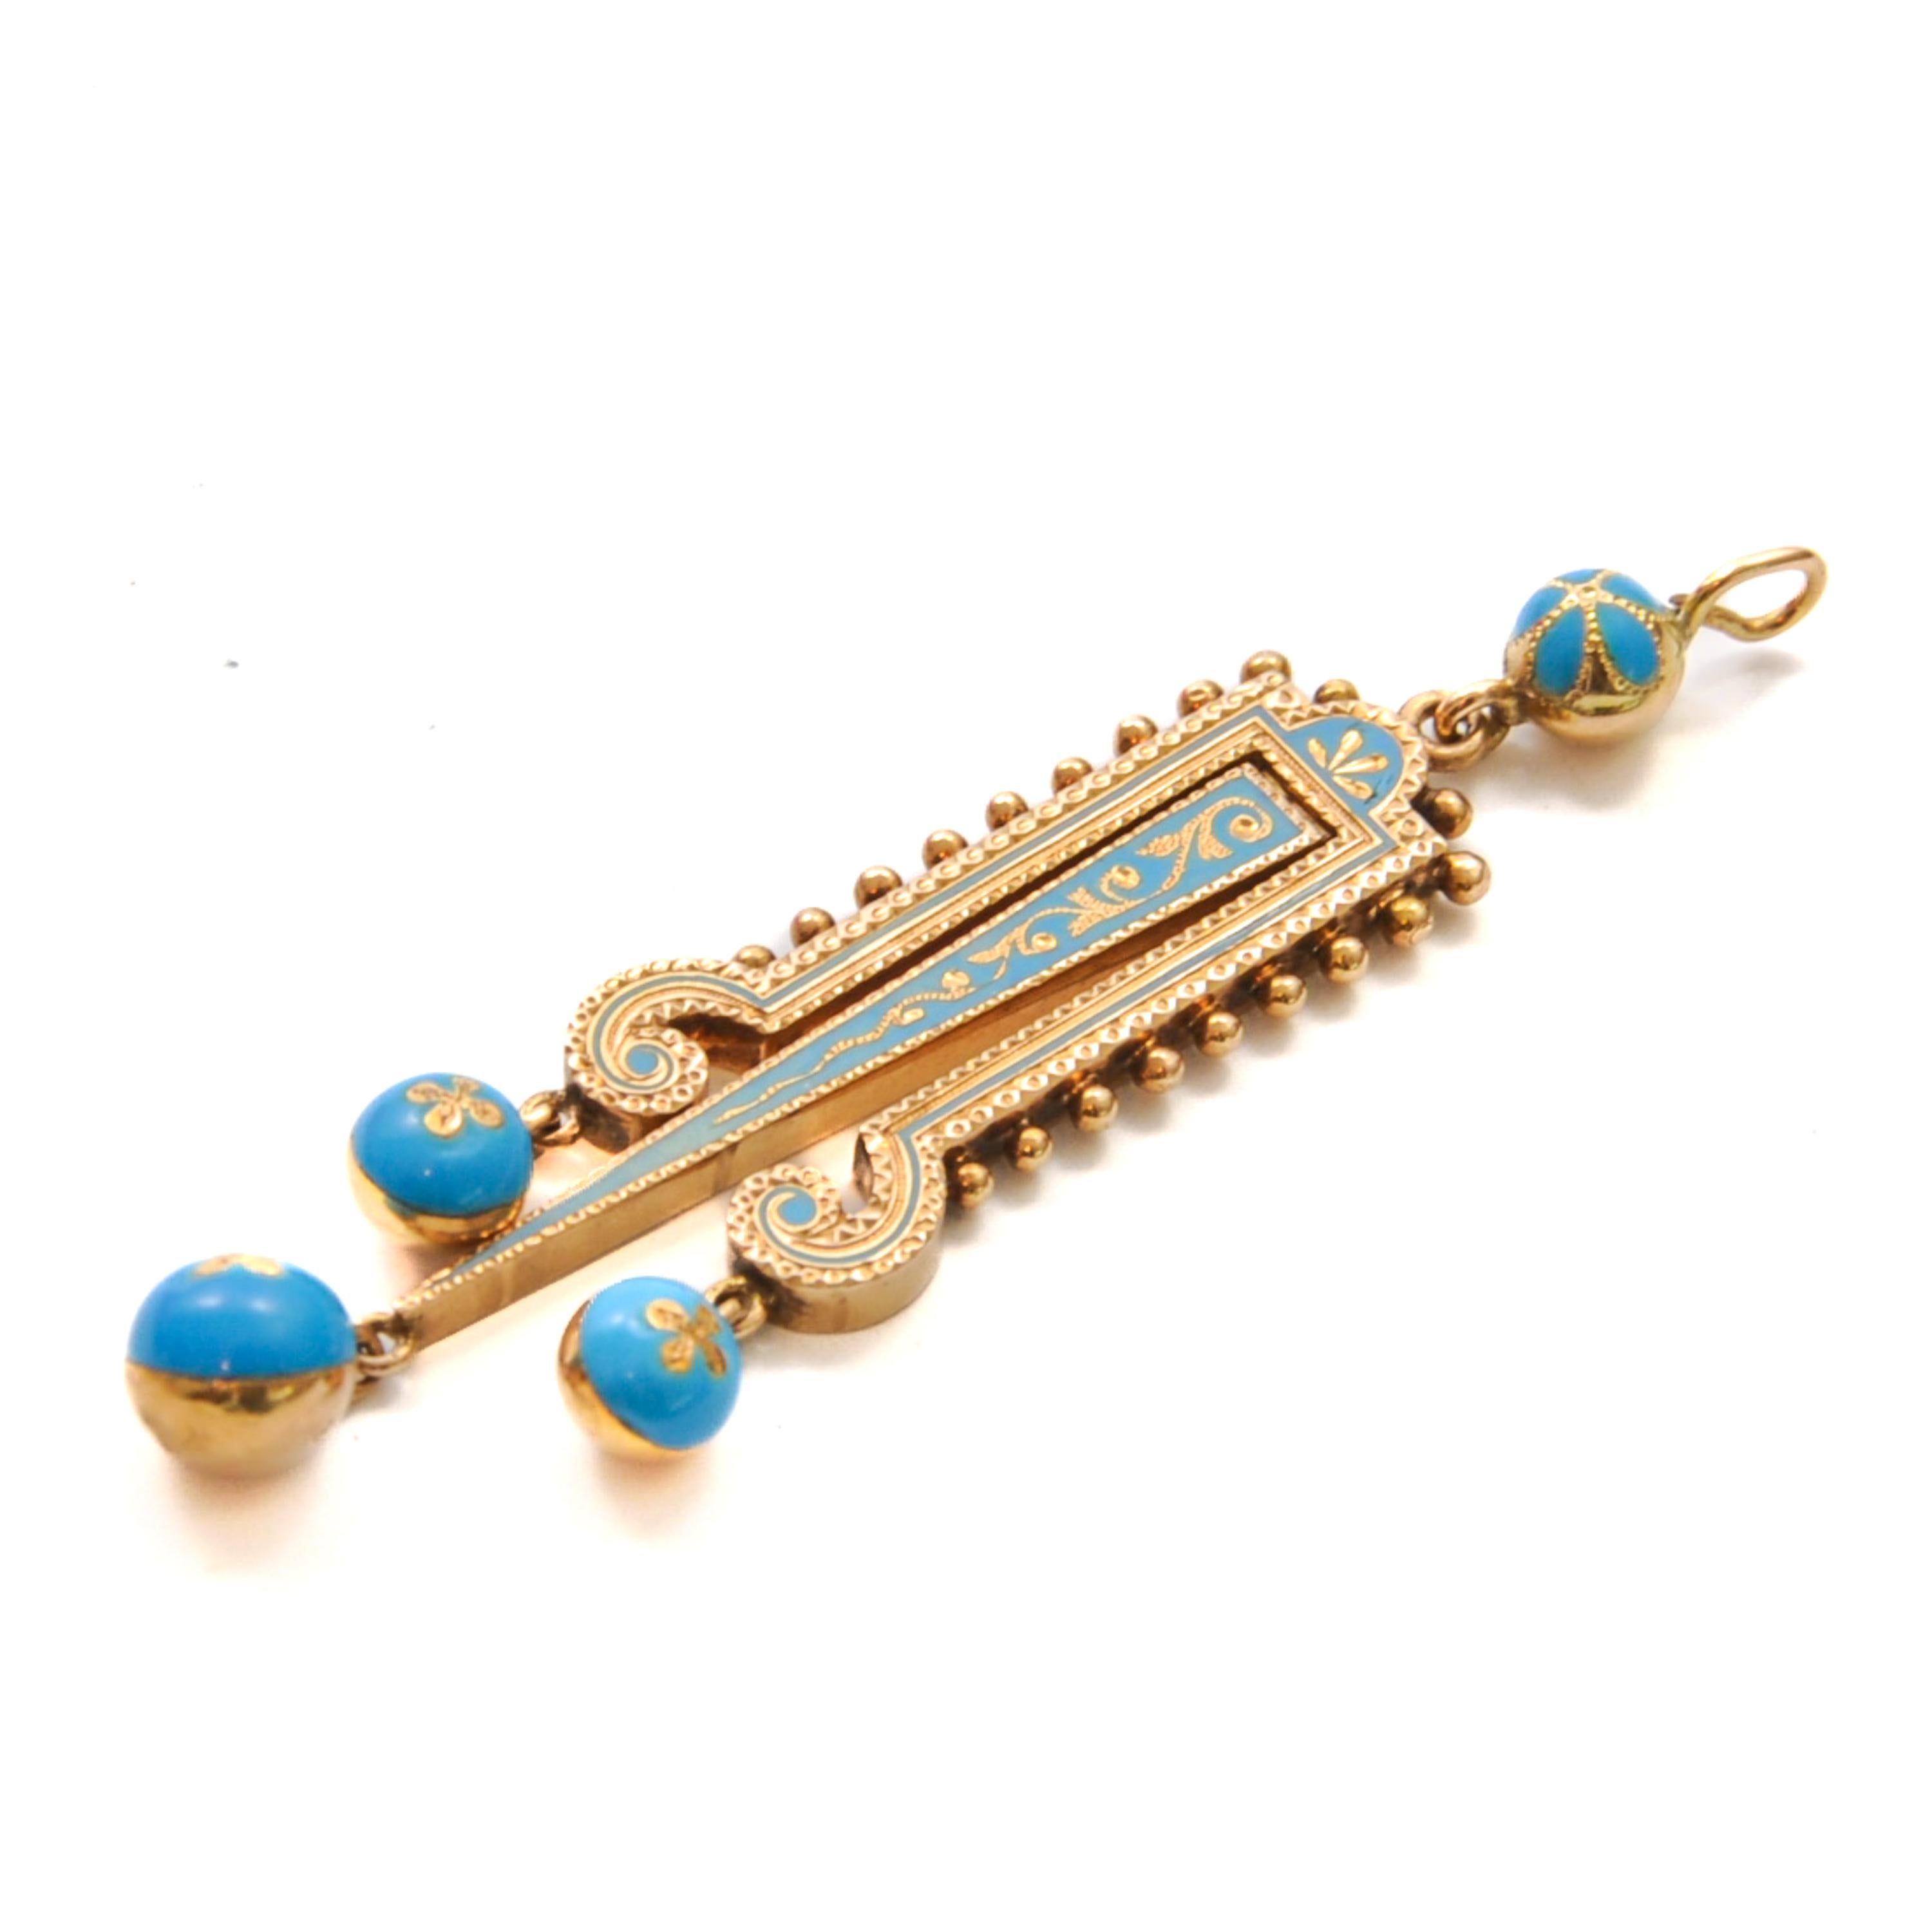 Antique Victorian 14K Gold and Turquoise Enameled Movable Pendant For Sale 5